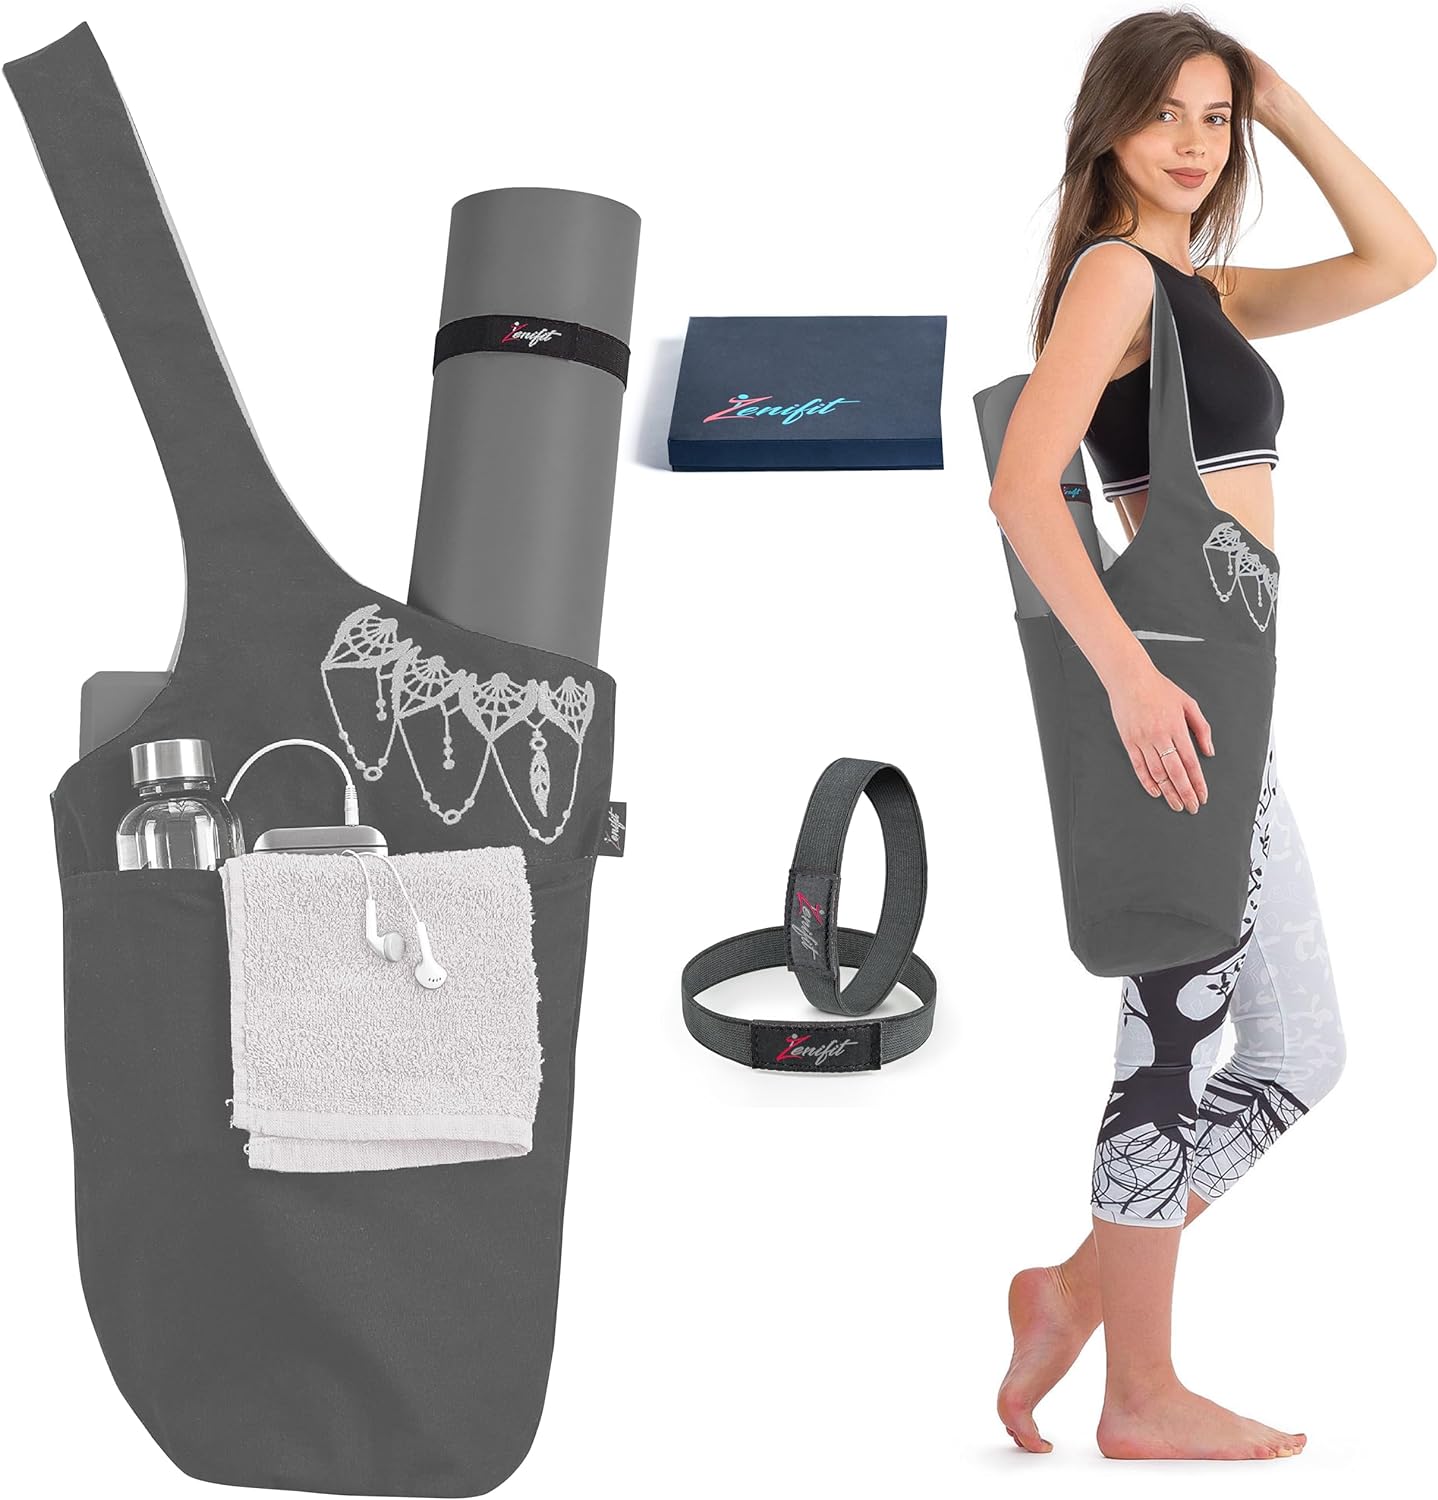 Yoga mat bag gray and white with accessories, gift box and elastics, women wearing yoga bag on shoulder